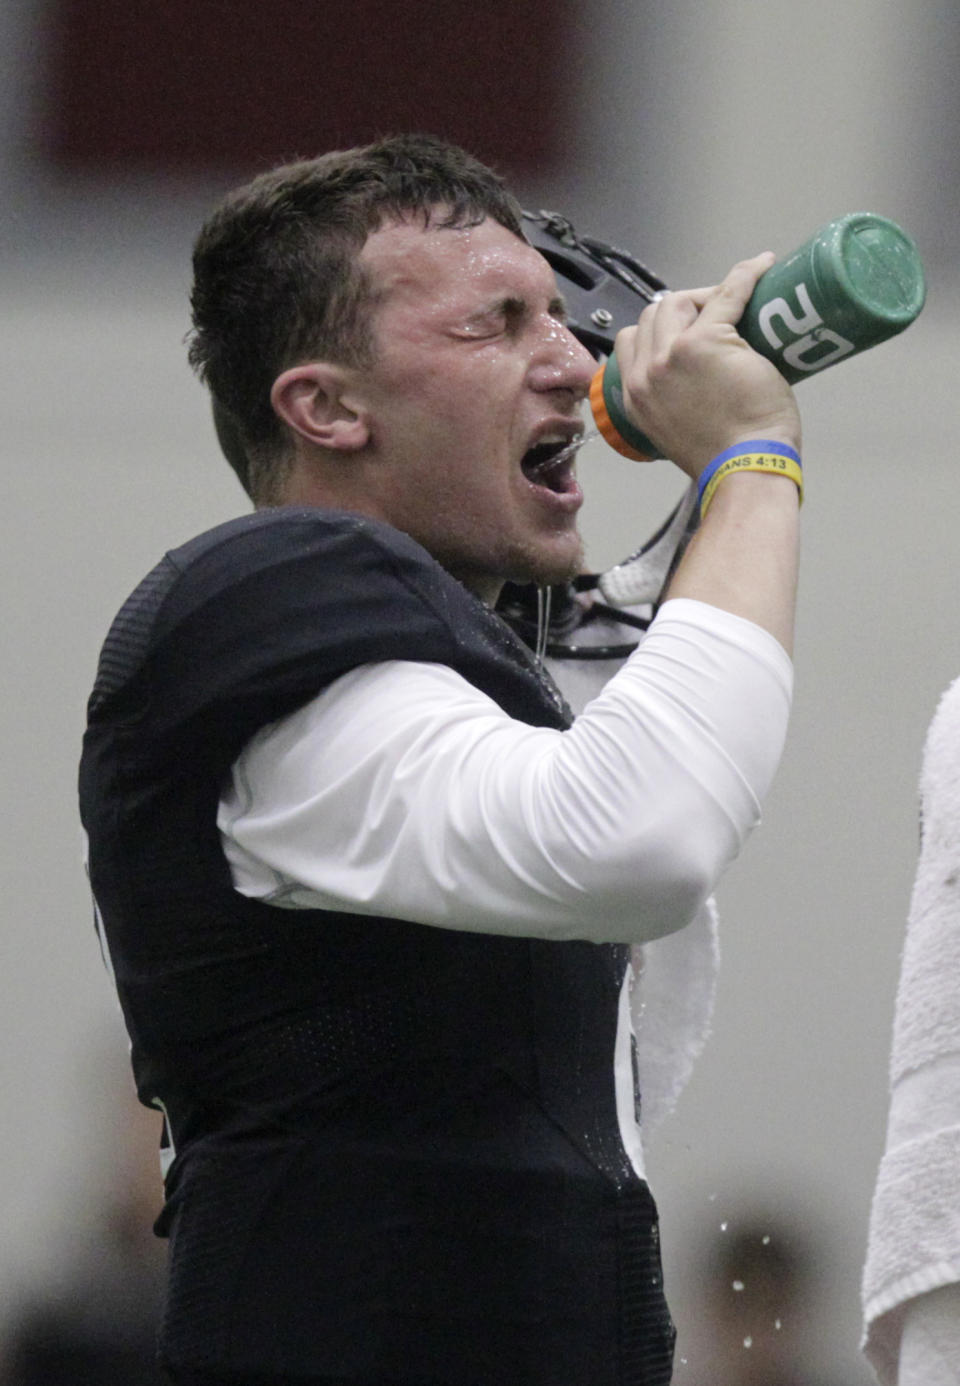 Texas A&M quarterback Johnny Manziel gets a drink at pro day for NFL football representatives in College Station, Texas, Thursday, March 27, 2014. (AP Photo/Patric Schneider)